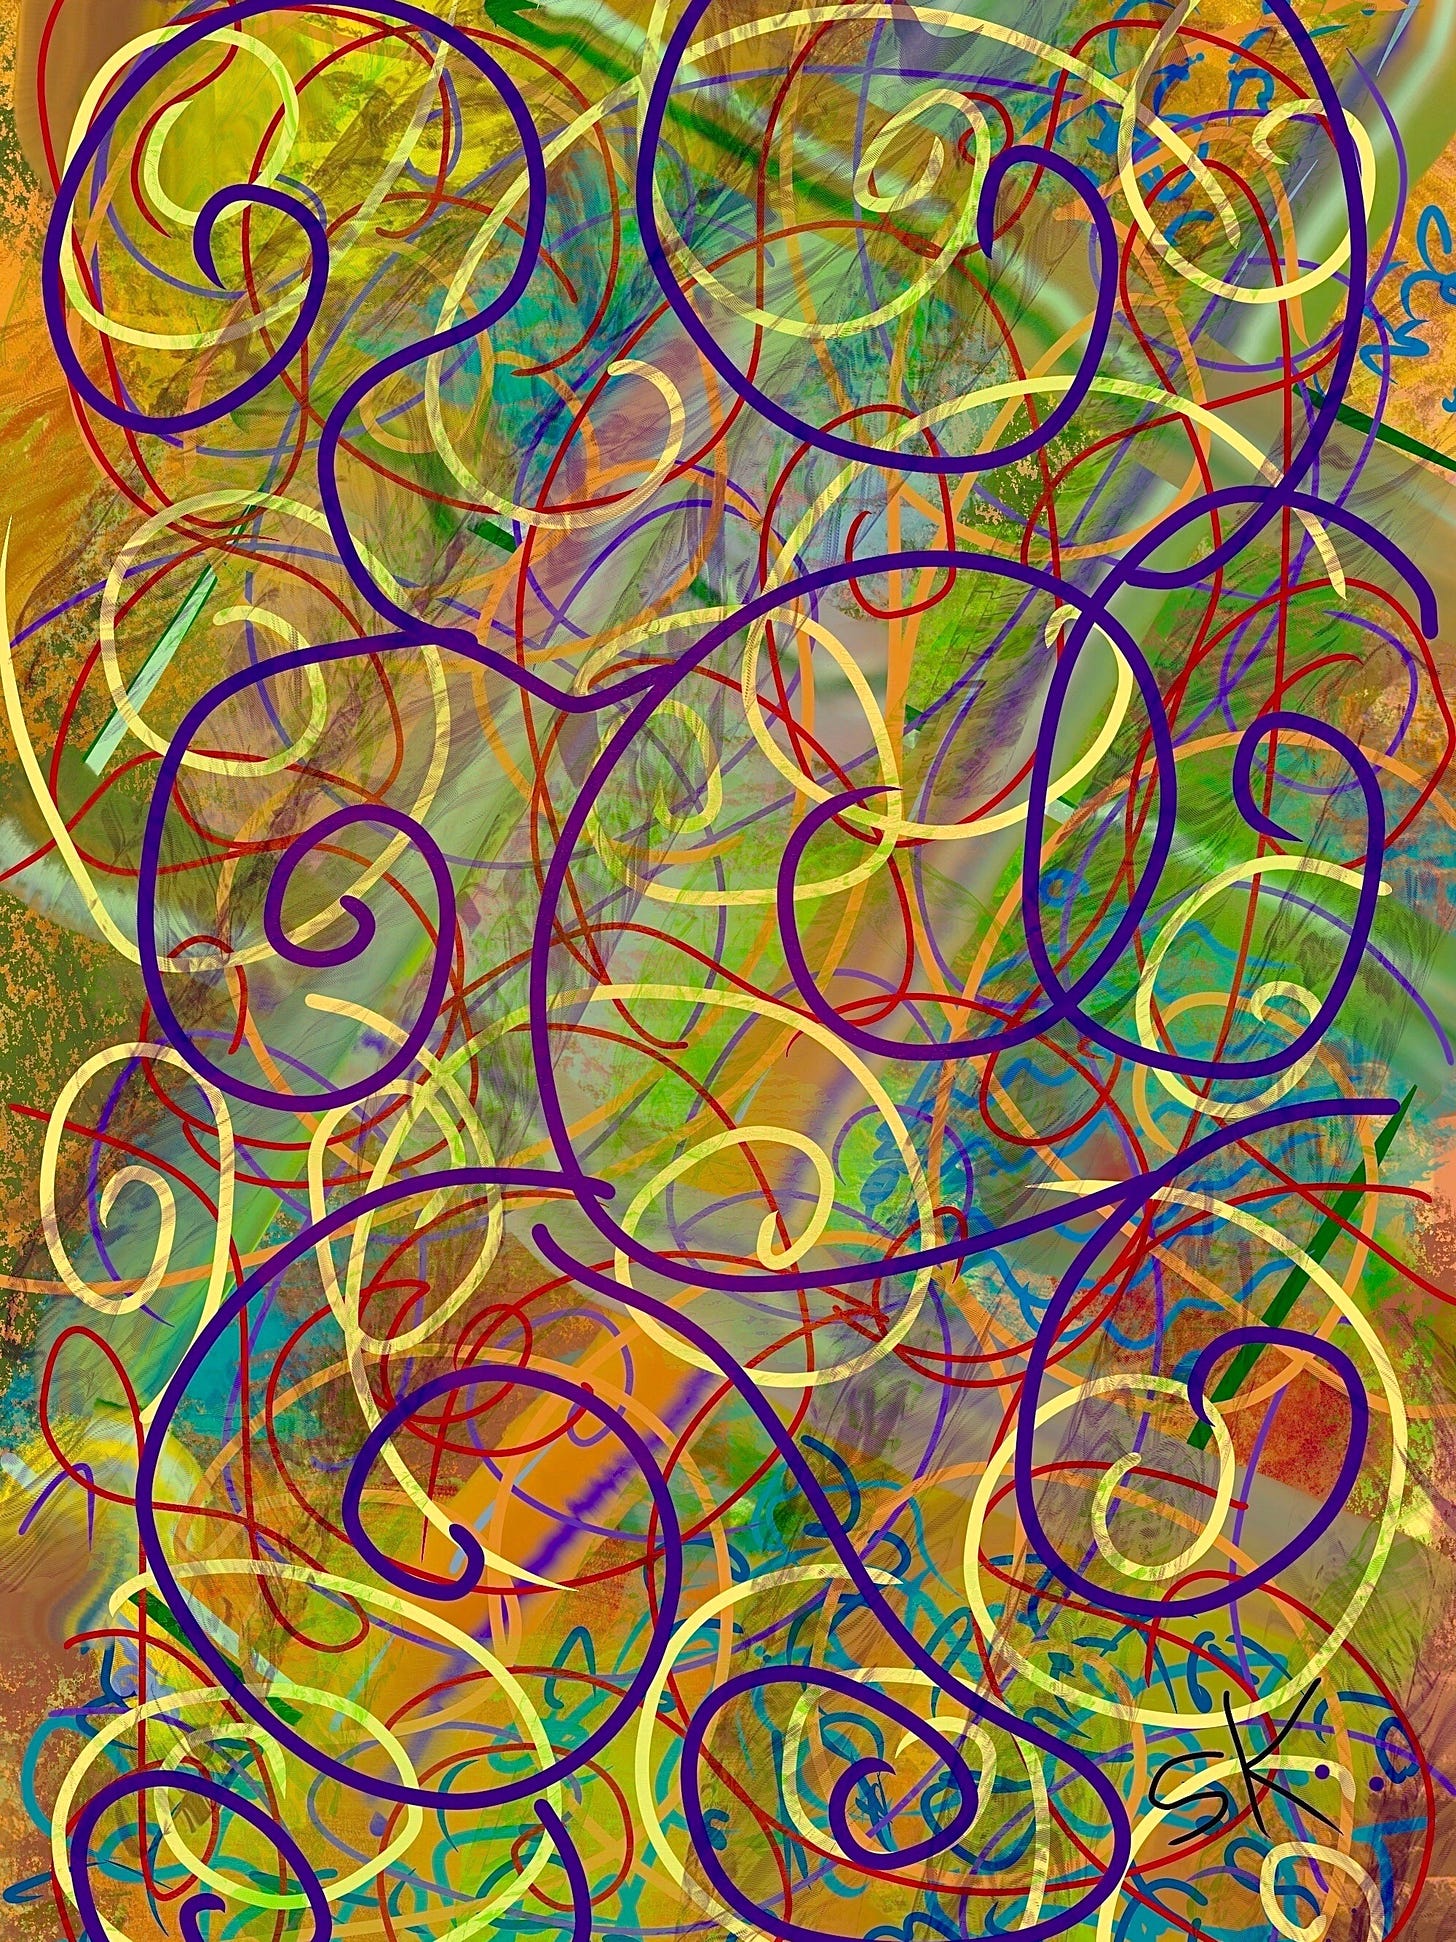 Abstract painting by Sherry Killam Arts featuring multicolored curved lines overlapping each other.